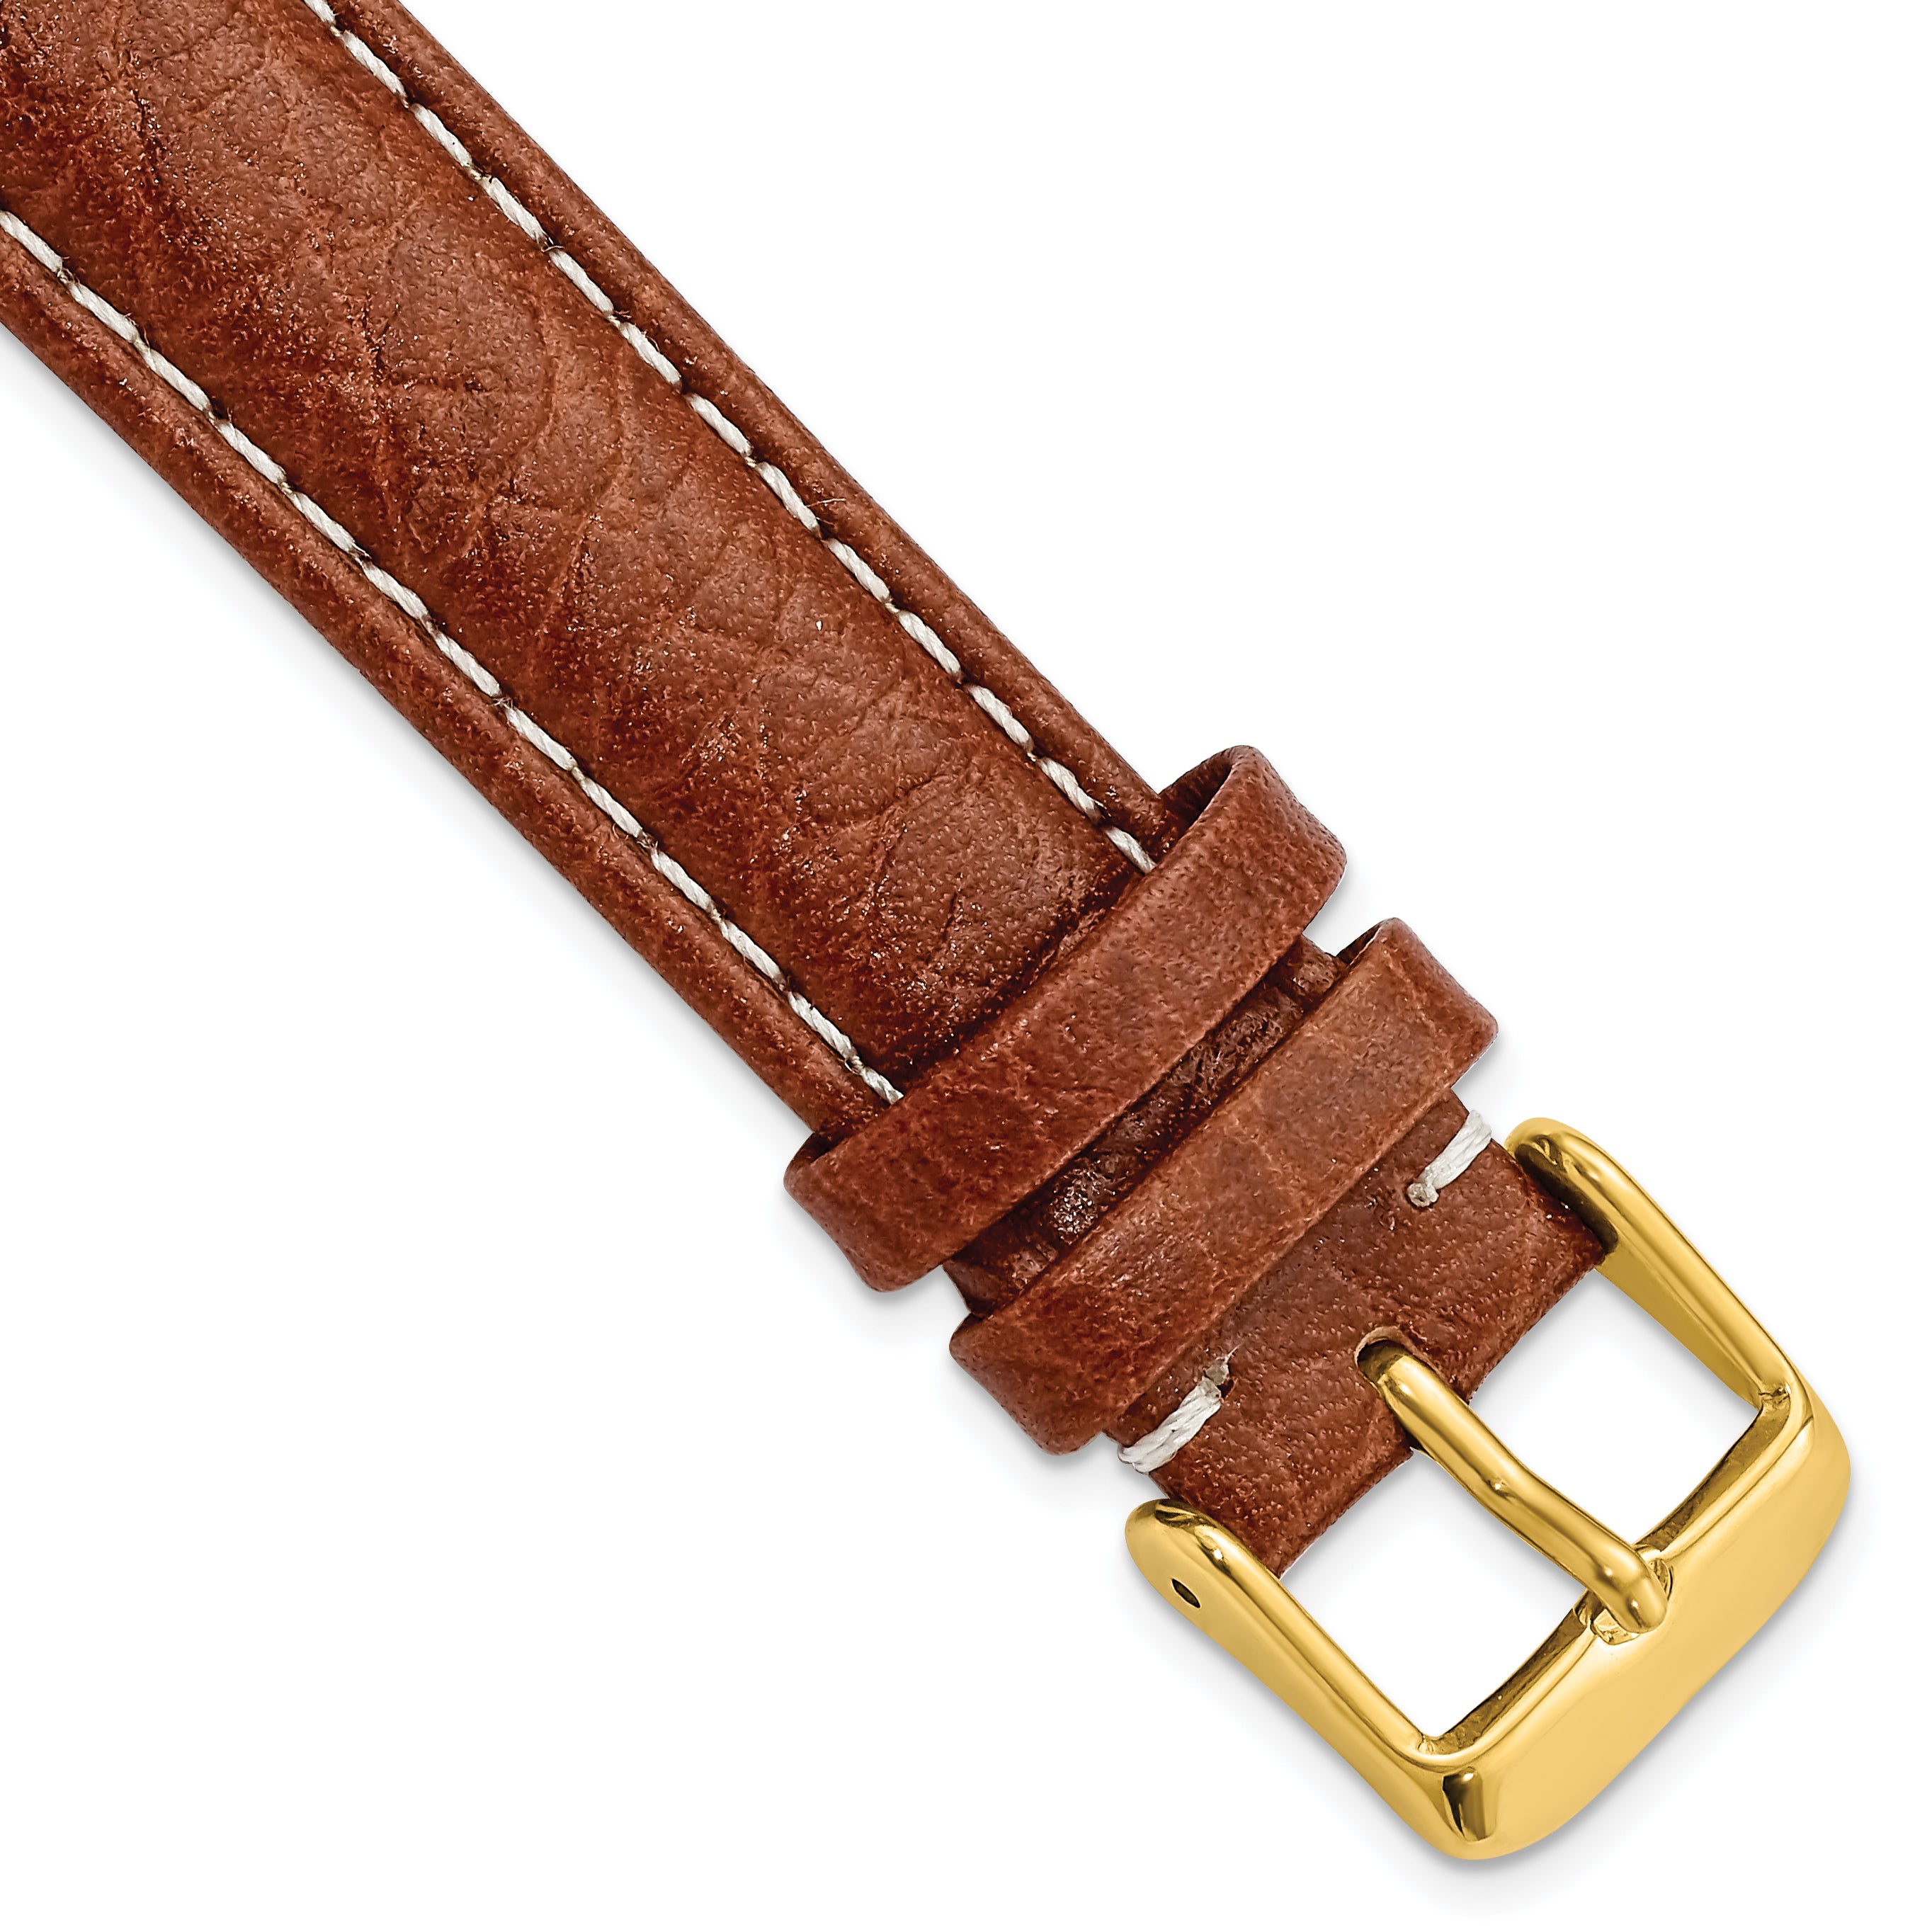 DeBeer 18mm Havana Sport Leather with White Stitching and Gold-tone Buckle 7.5 inch Watch Band